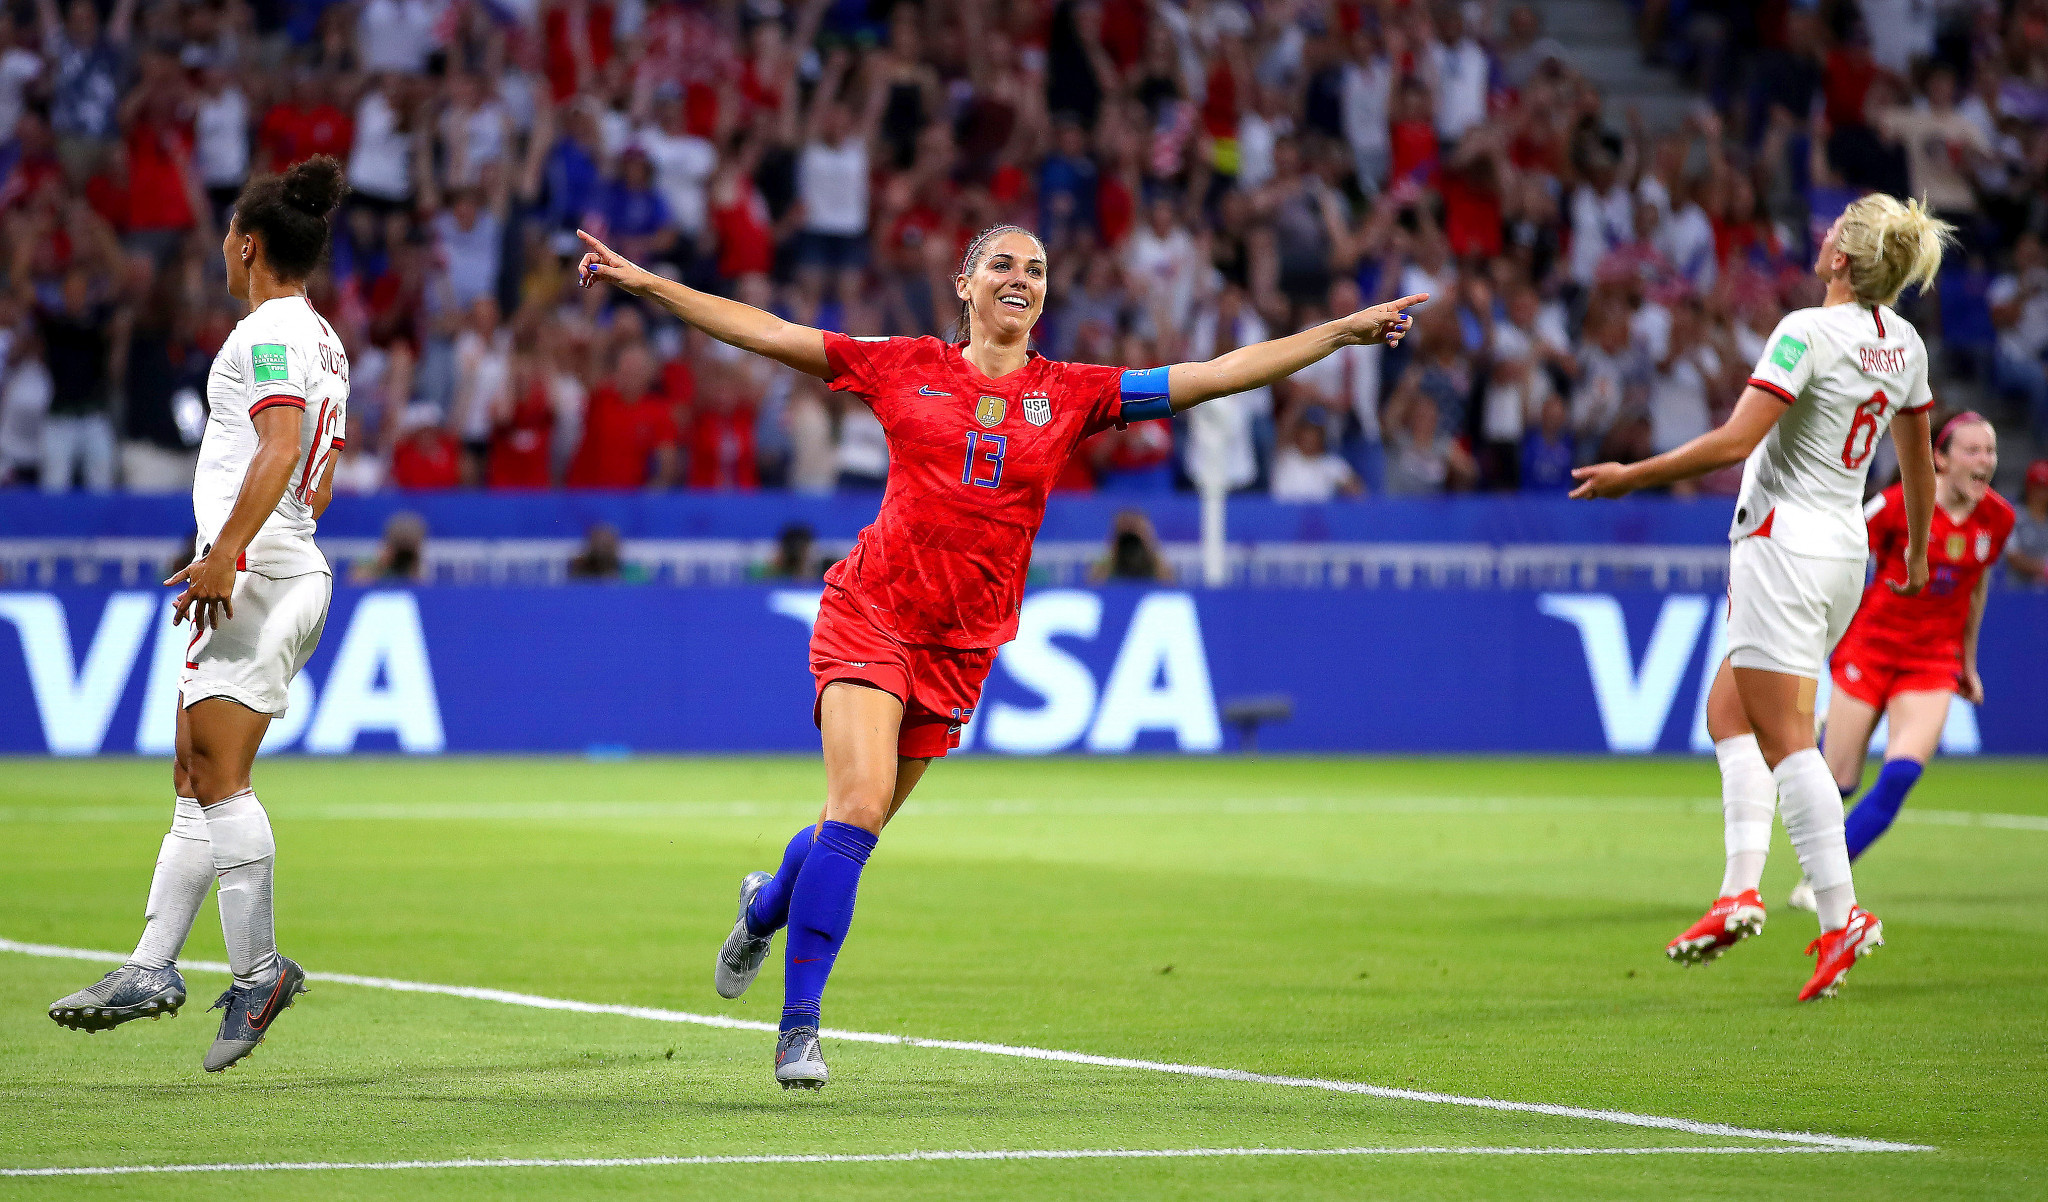 Defending champions the United States reached their third consecutive FIFA Women's World Cup final ©Getty Images